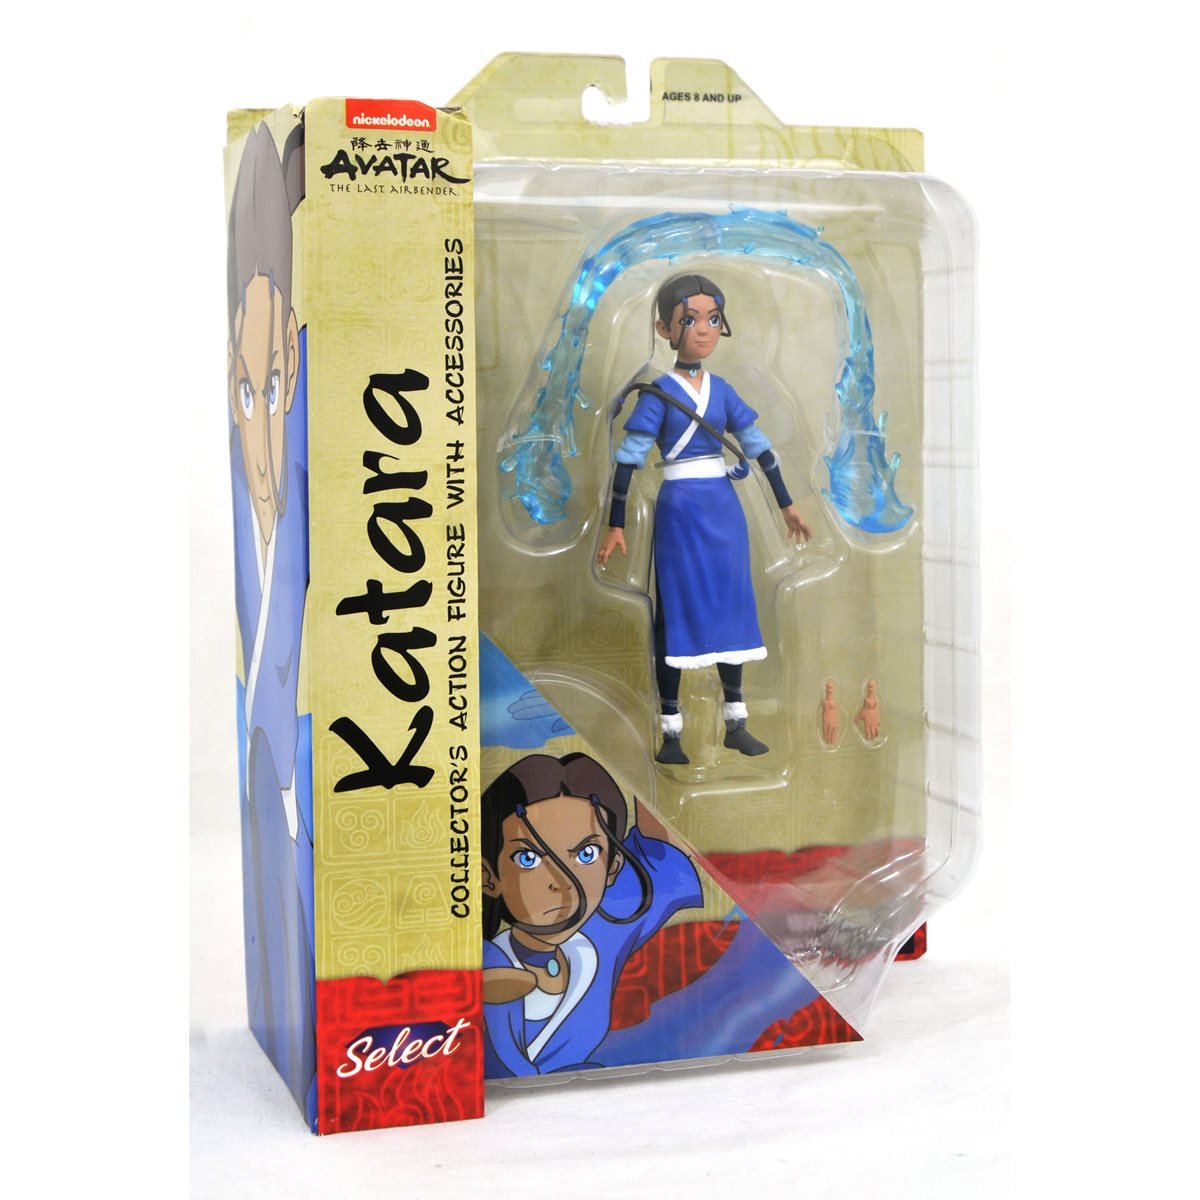 AWESOME Avatar the Last Airbender  Aang  Zuko  Azula  Action Figures  Diamond Select Toy Unboxing  YouTube